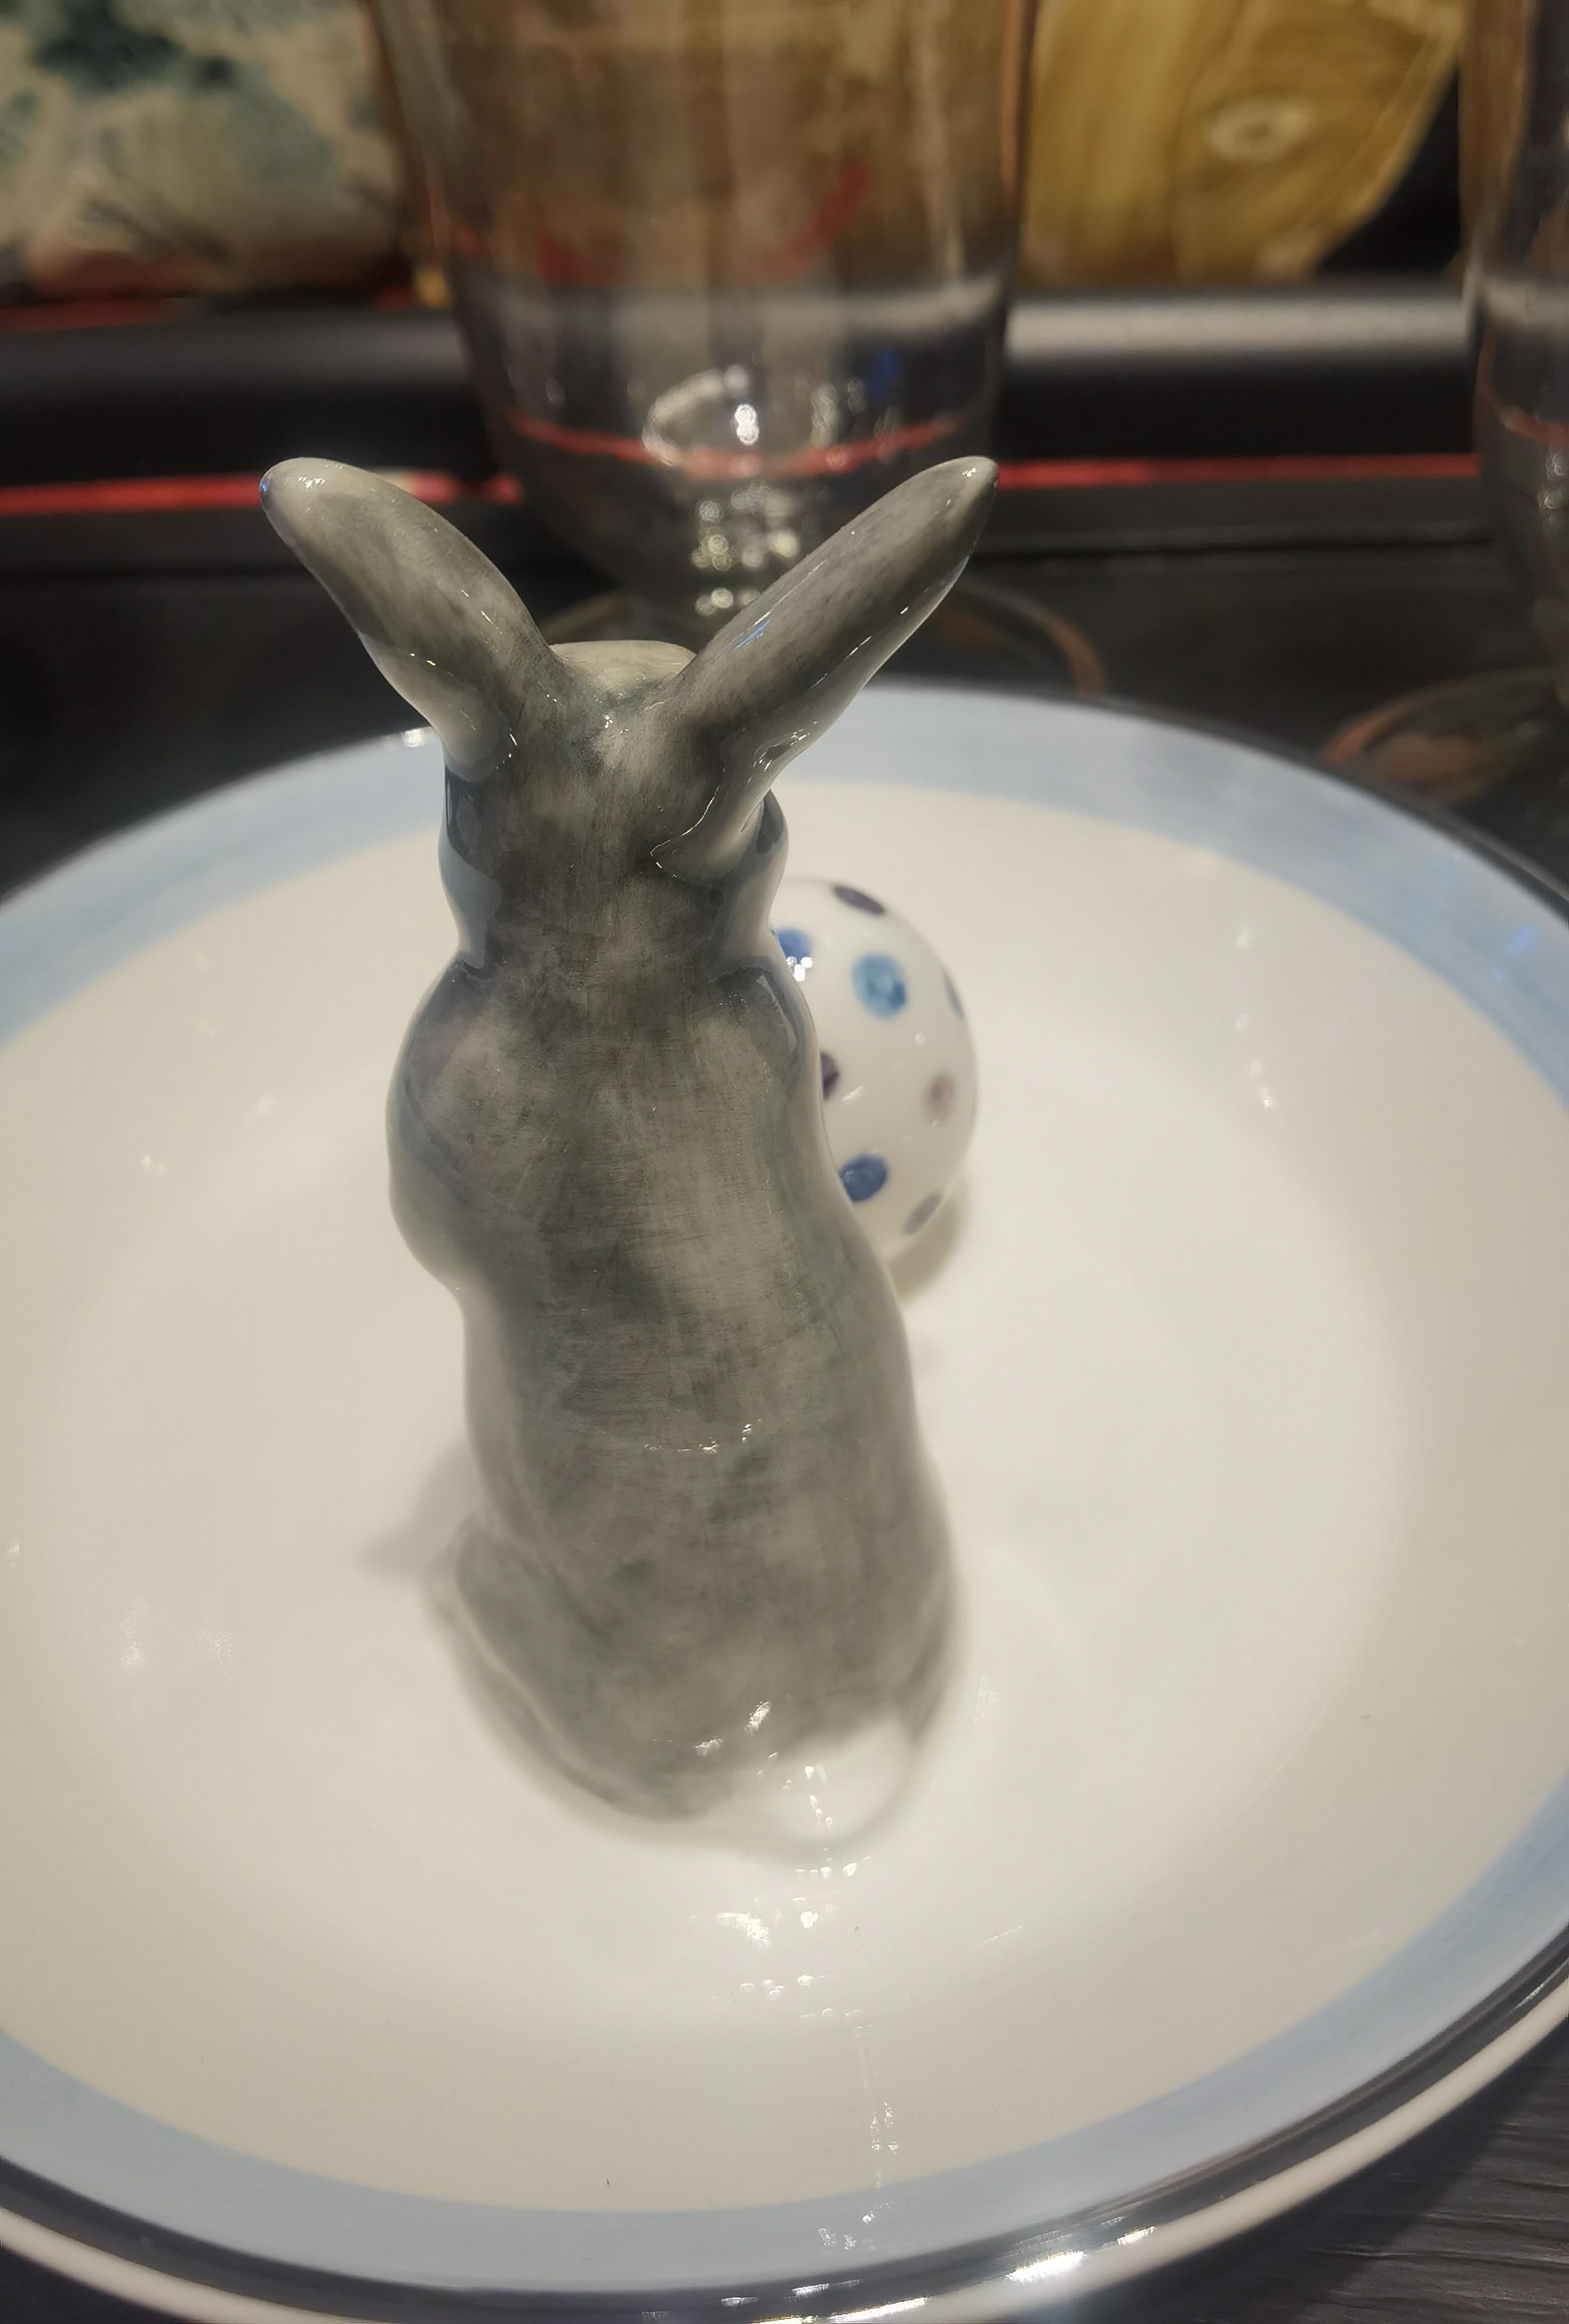 Completely handmade porcelain bowl with a hands-free naturalistic painted hare figure in grey and white with an egg. The Easter bunny is sitting next to a handpainted egg for decorating nuts or sweets around. Rimmed with a pale blue and platinum